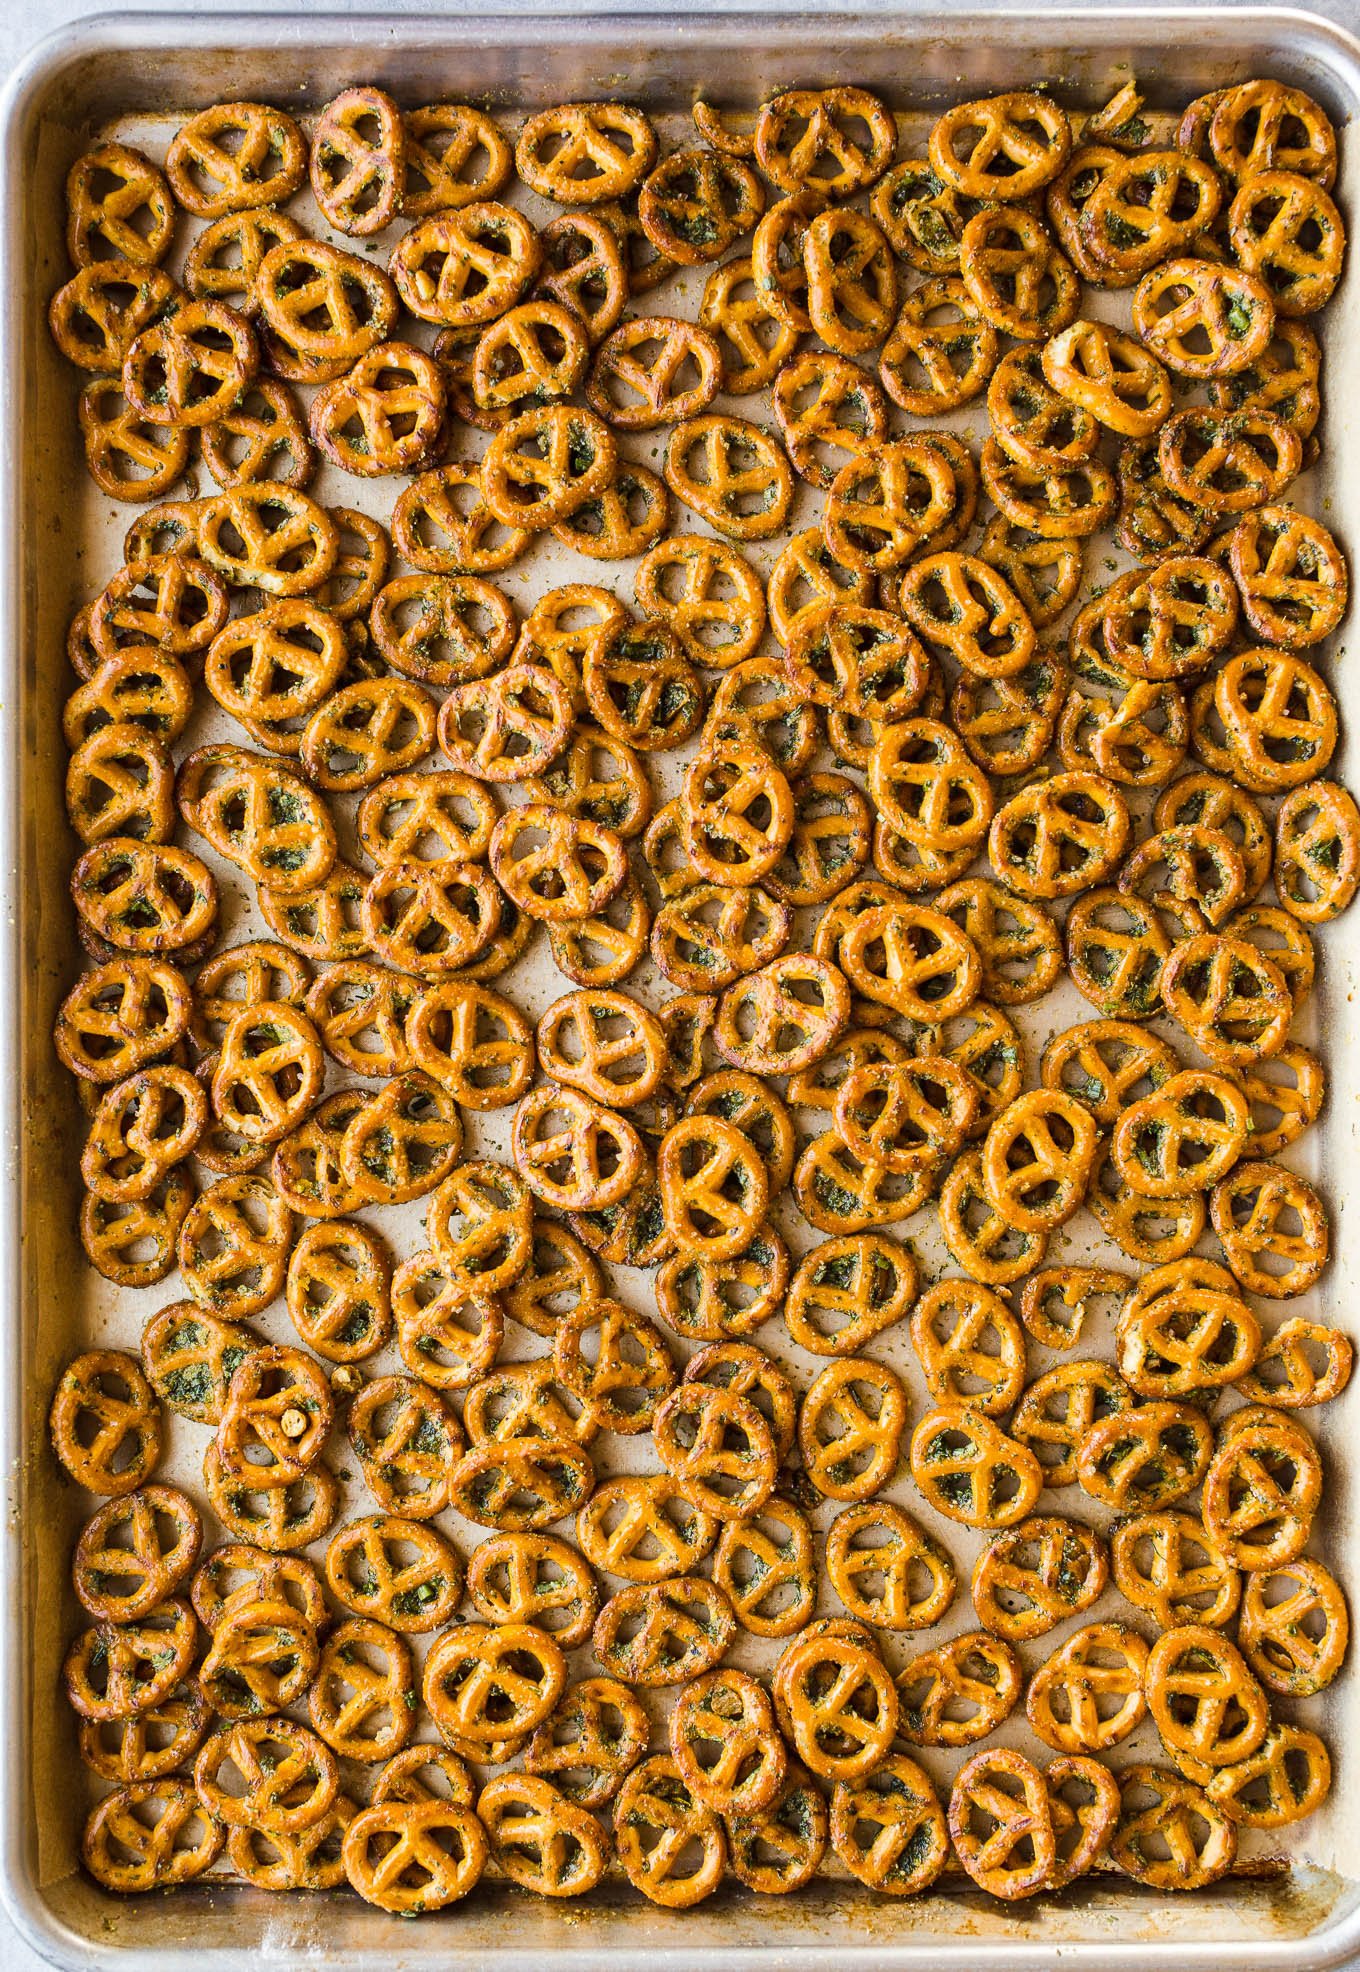 Gluten-Free Seasoned Pretzels made with olive oil, herbs, and nutritional yeast for an easy homemade snack recipe. Vegan.